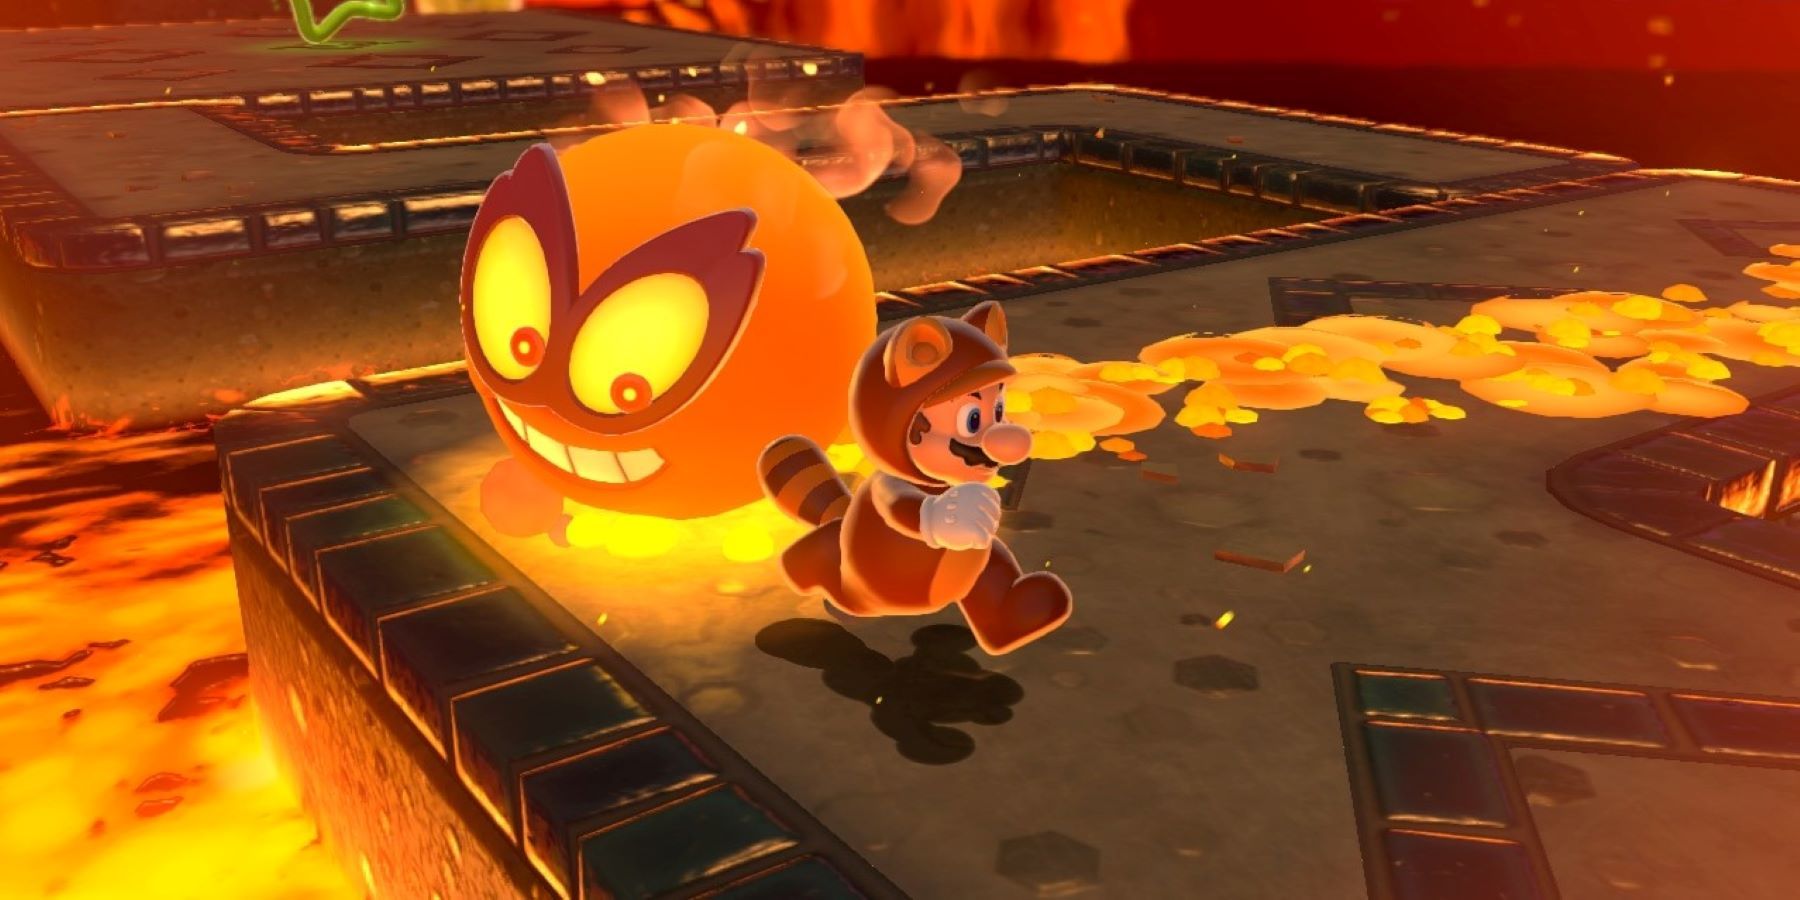 Tanooki Mario running away from an enemy on a fire level in Super Mario 3D World